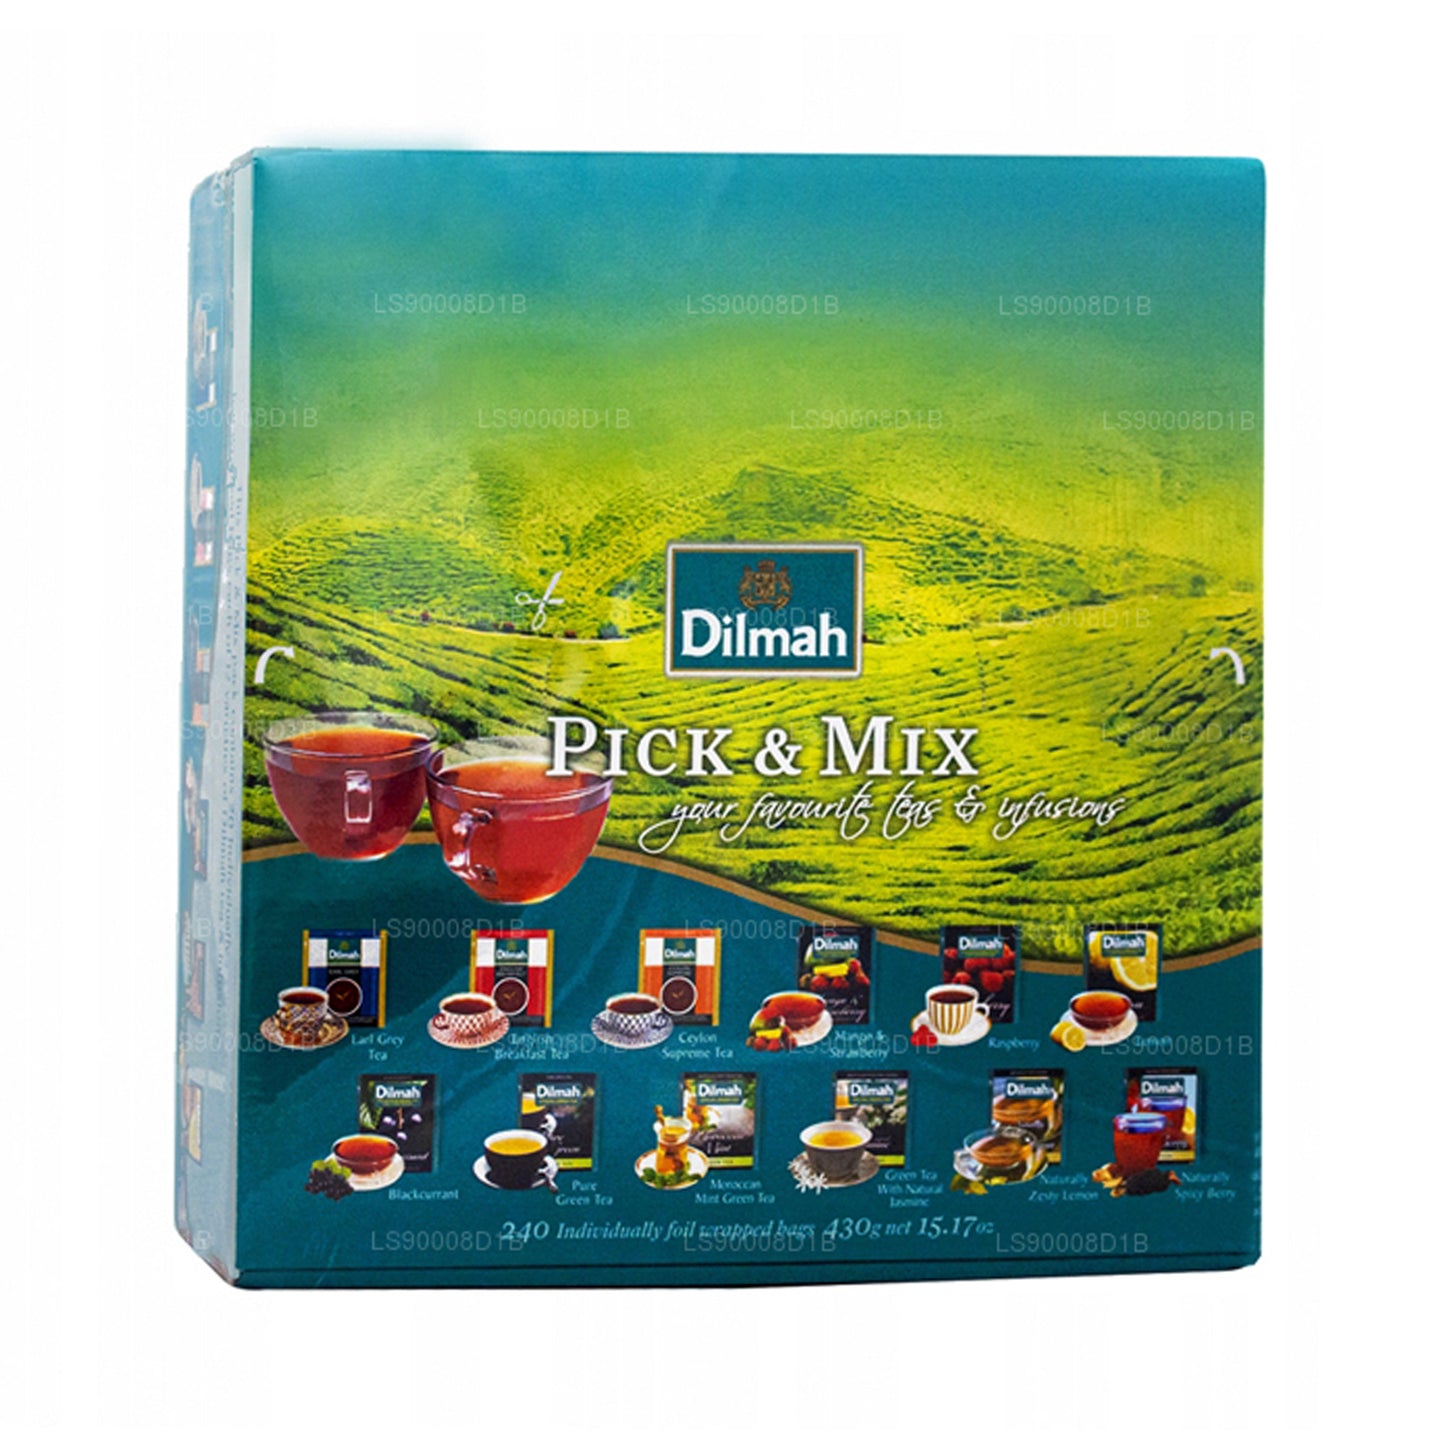 Dilmah Pick and Mix (430g) 240 个茶包